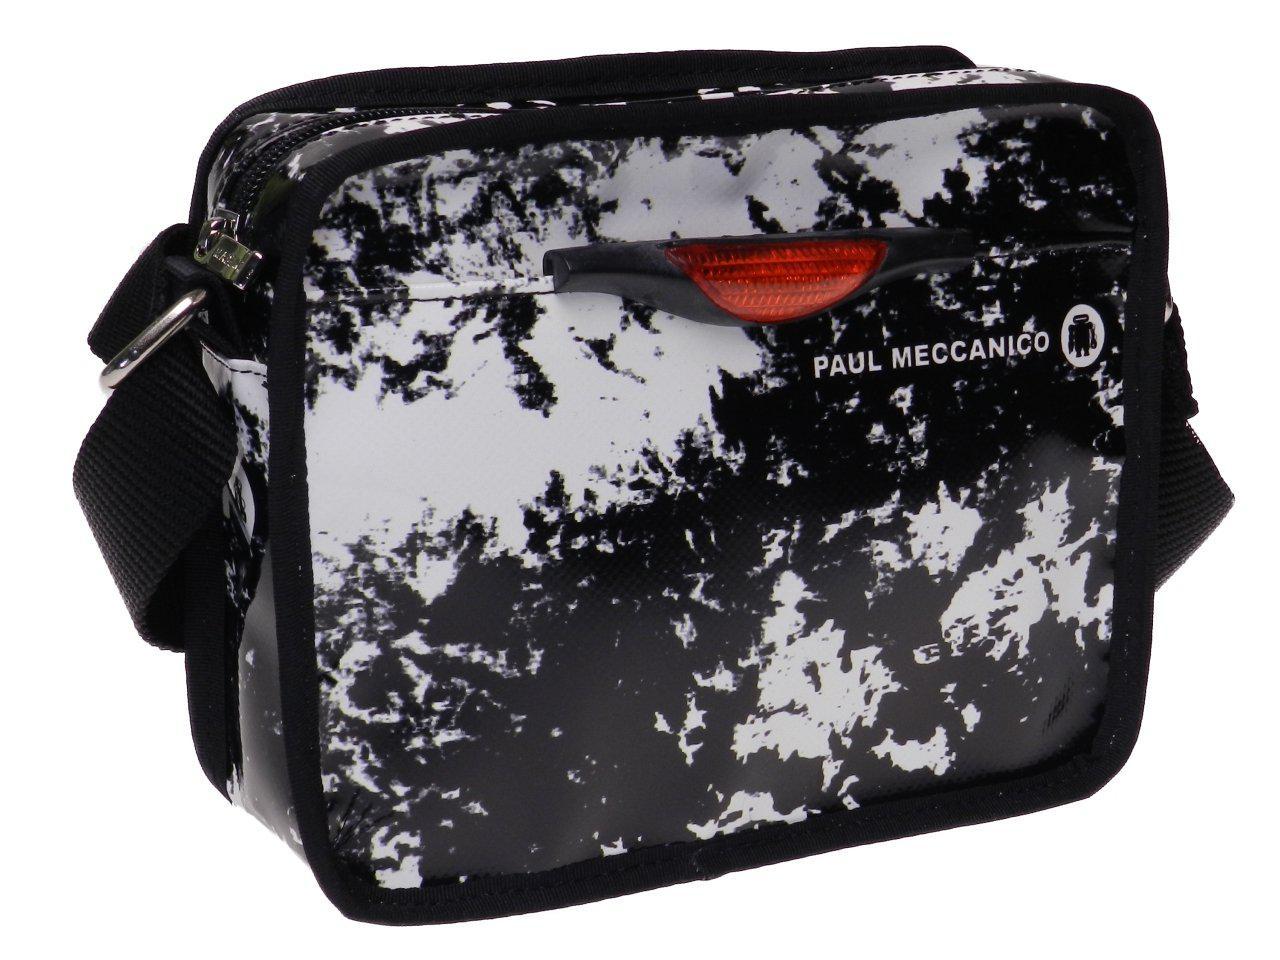 SMALL CROSSBODY BAG BLACK AND WHITE WITH TIE DYE FANTASY. MODEL FRIK MADE OF LORRY TARPAULIN. - Limited Edition Paul Meccanico